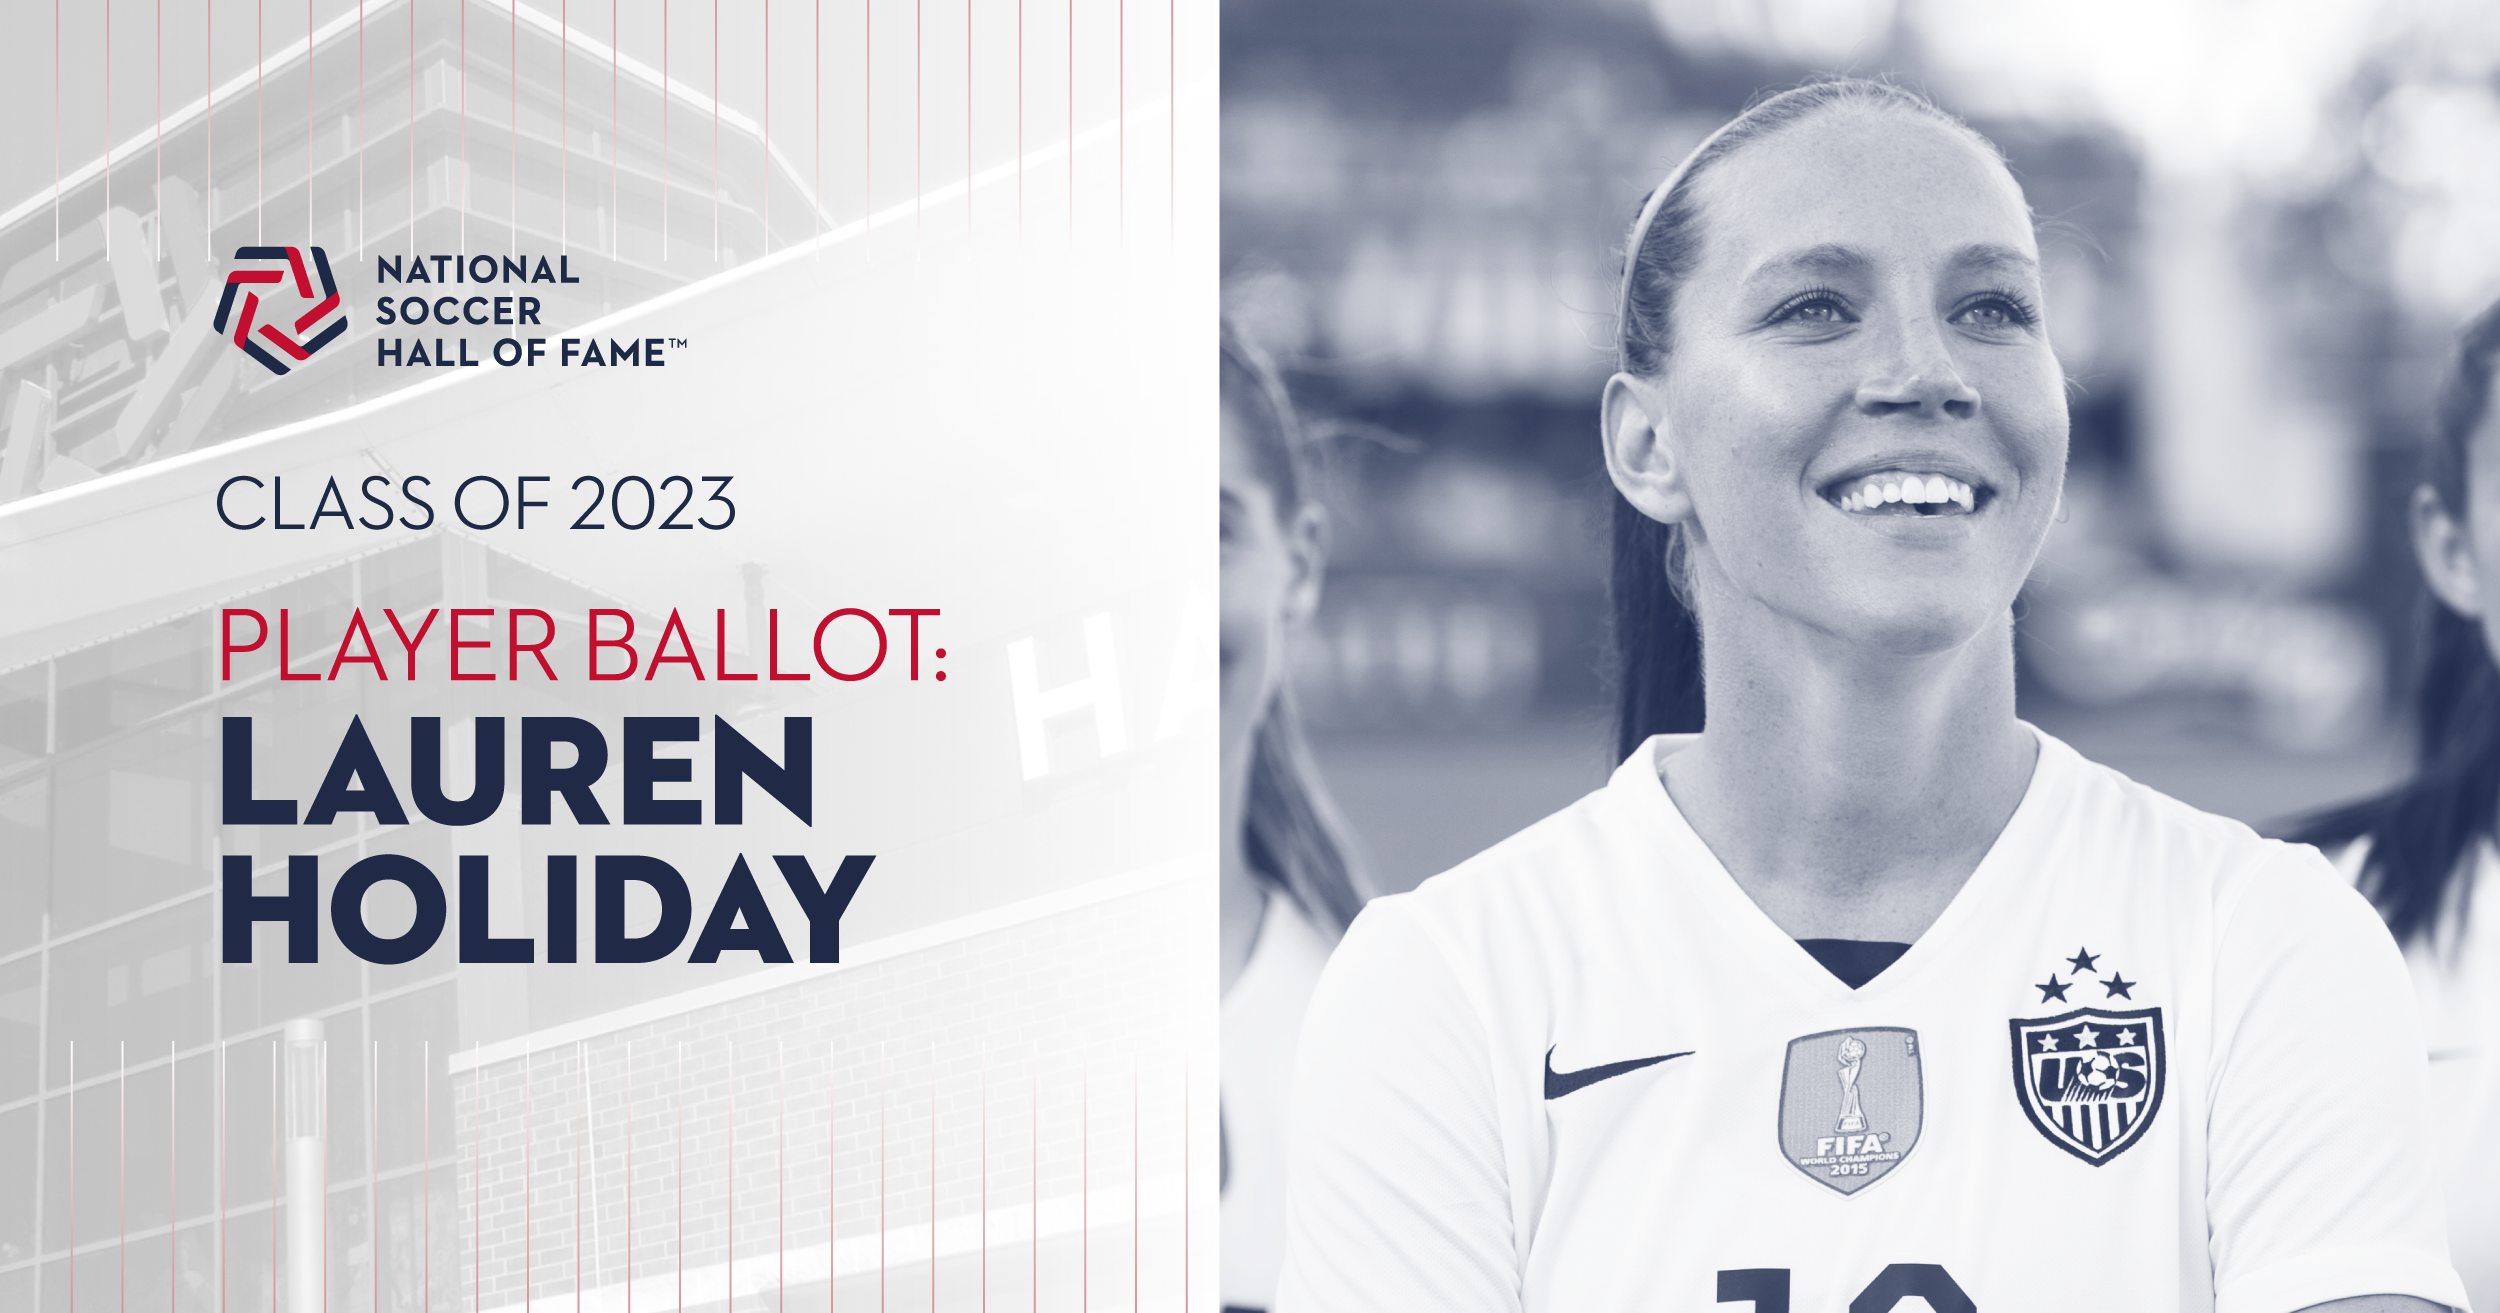 Announcement of Lauren Cheney Holiday's election to the Hall of Fame